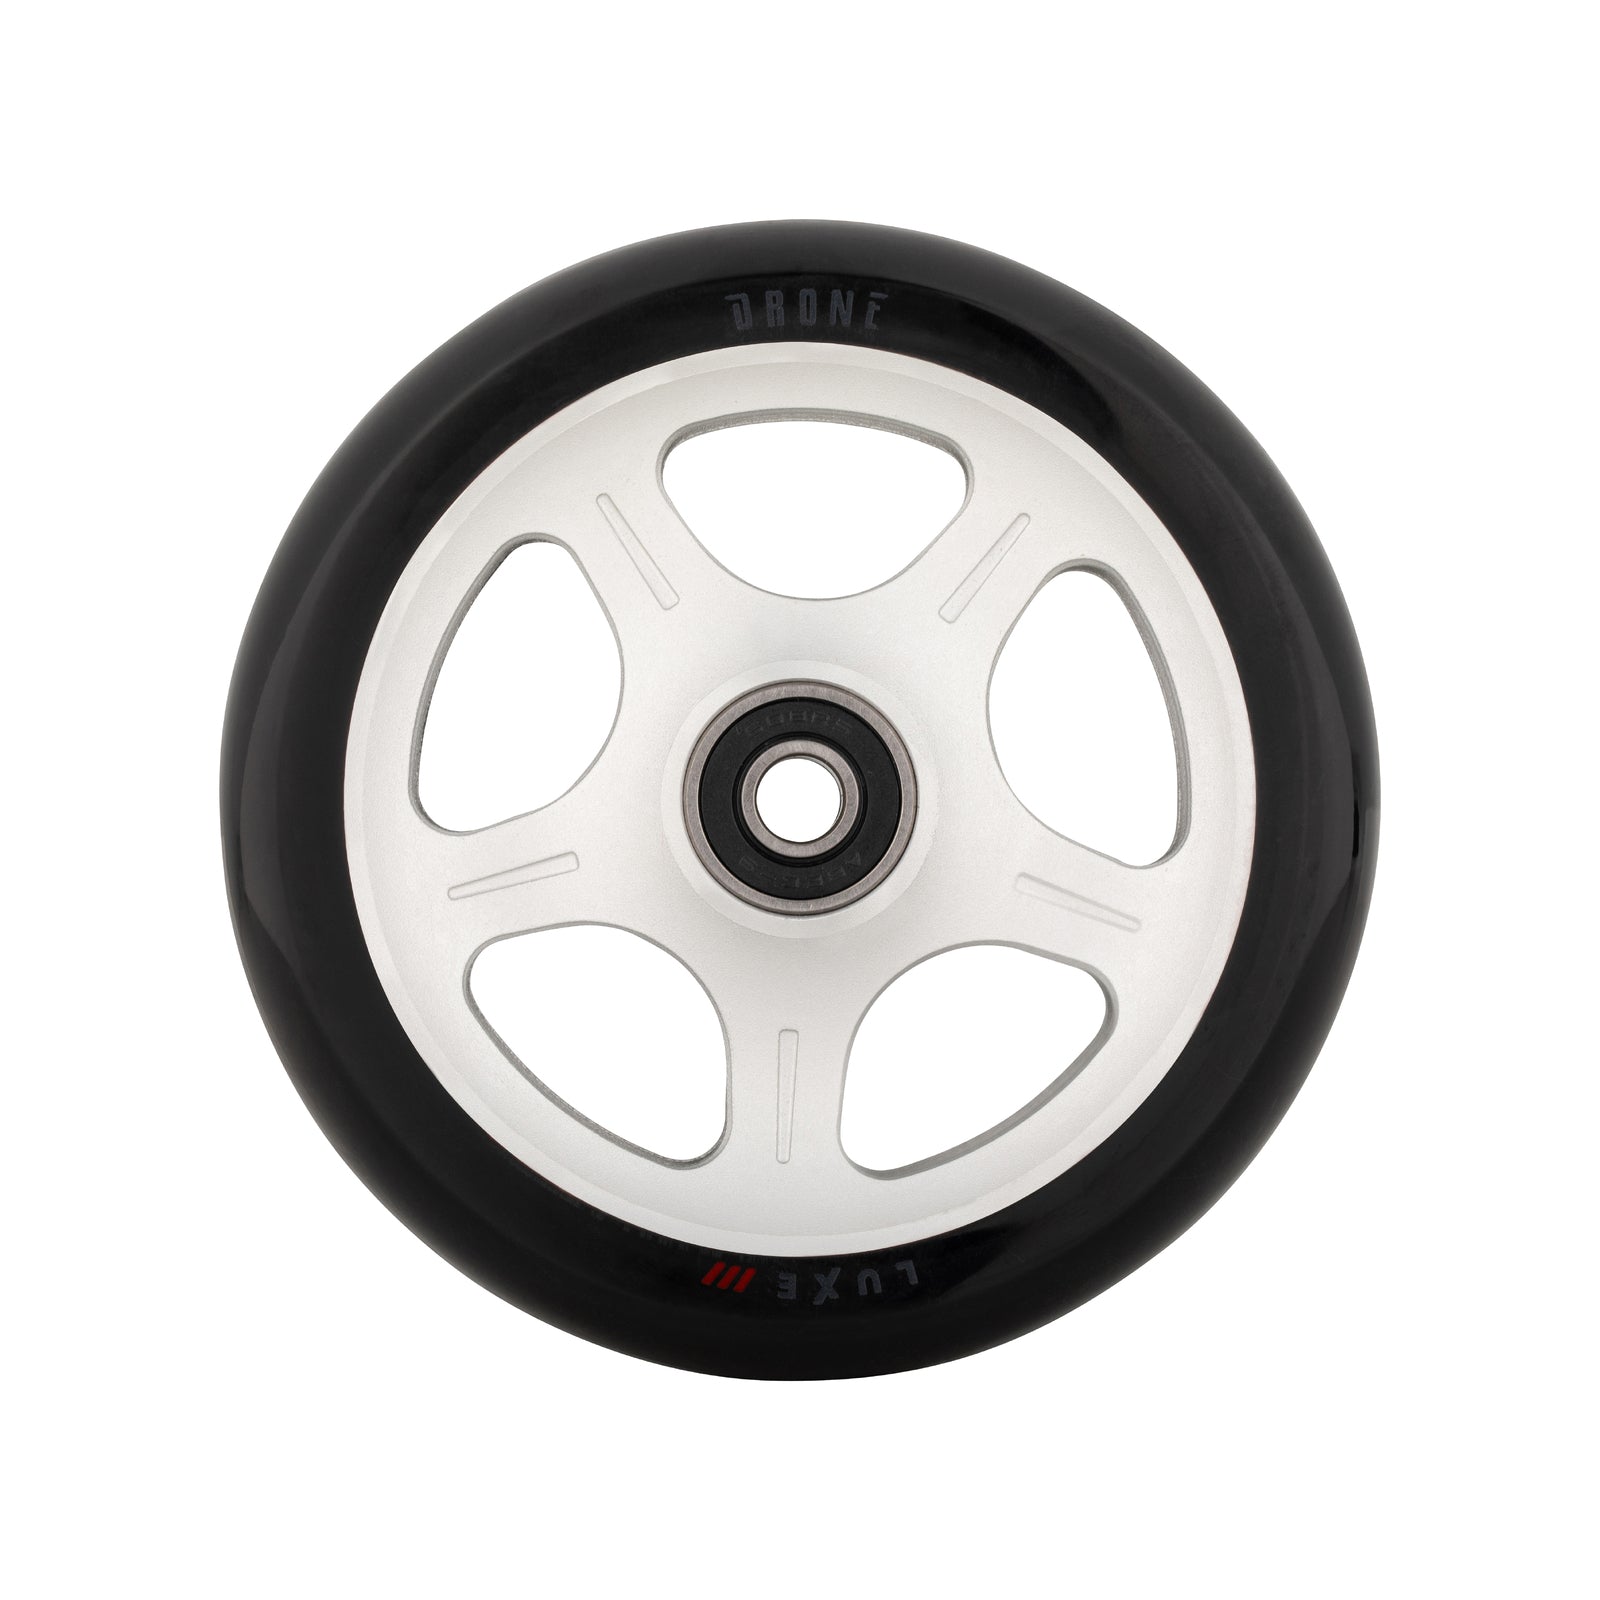 Drone LUXE 3 Dual-Core Feather-light Scooter Wheel 110mm